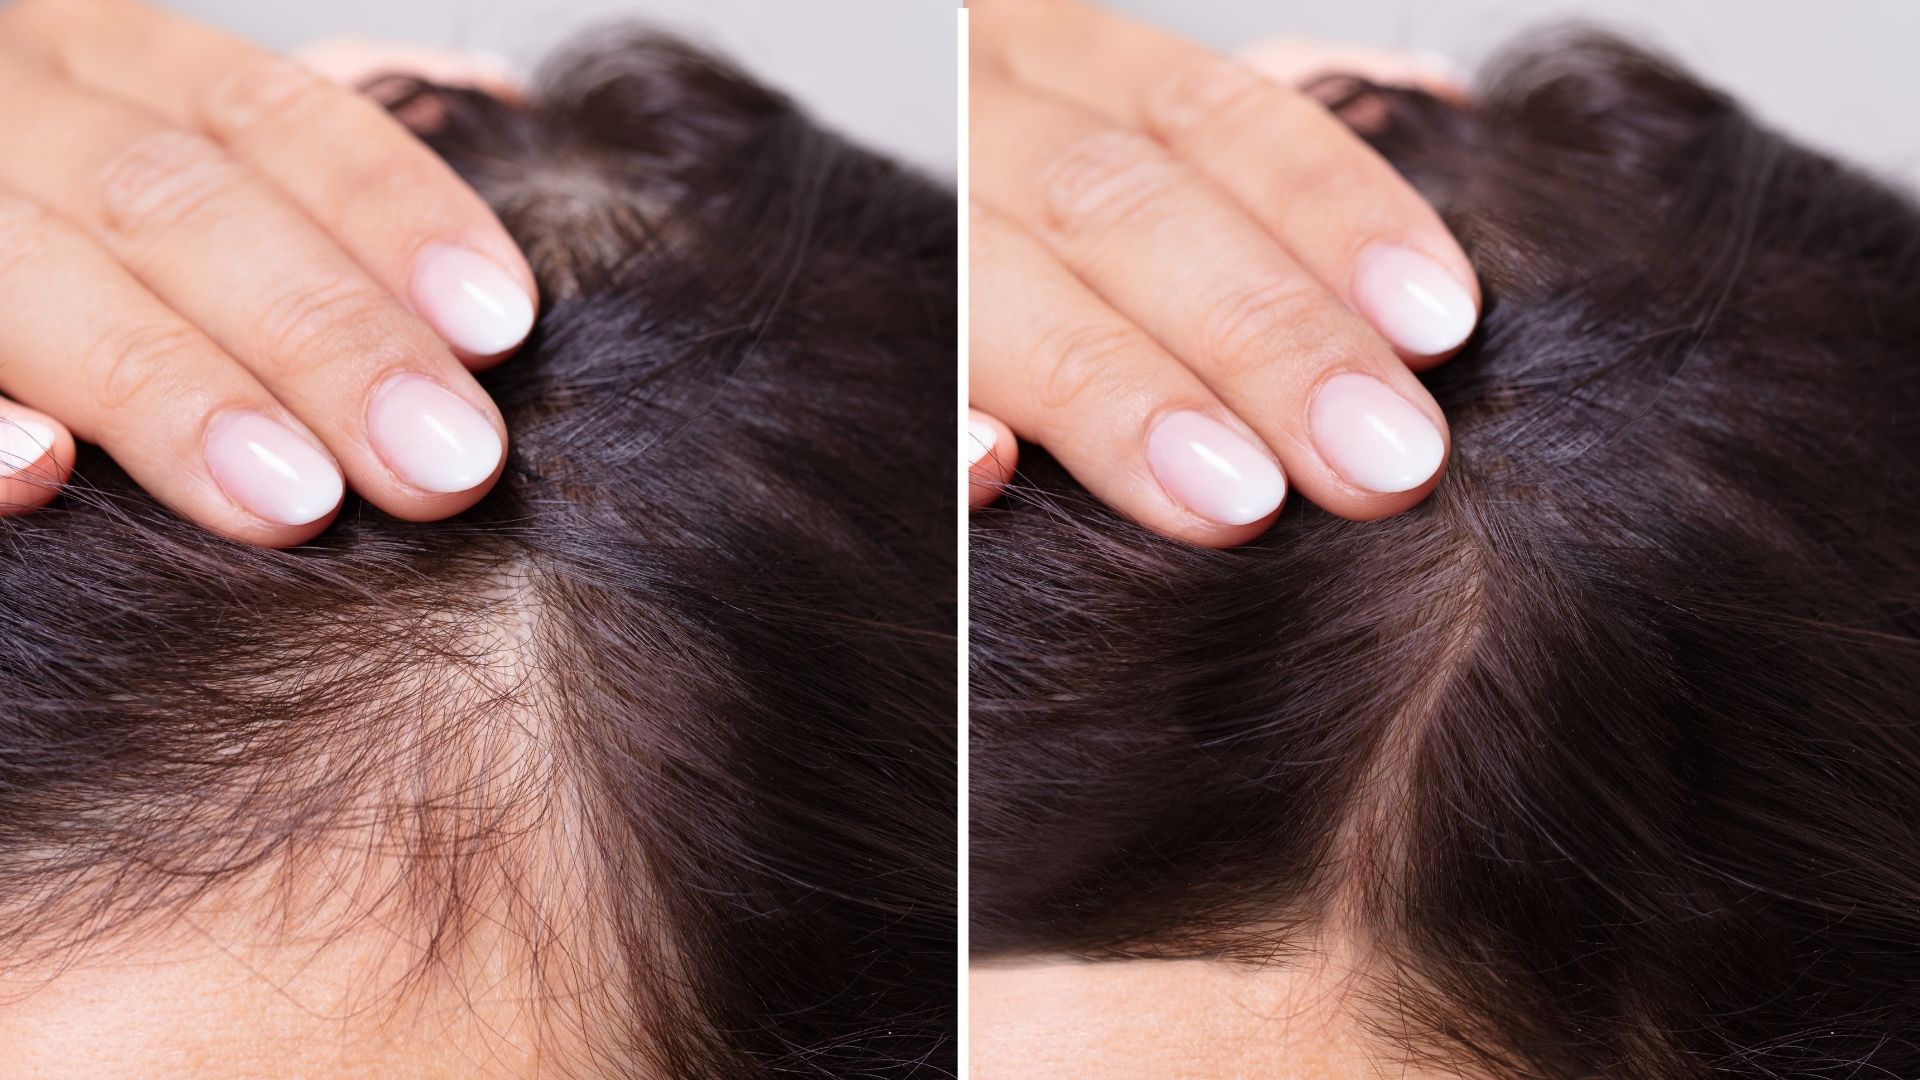 Hair Loss After Bariatric Surgery: Causes & Treatment